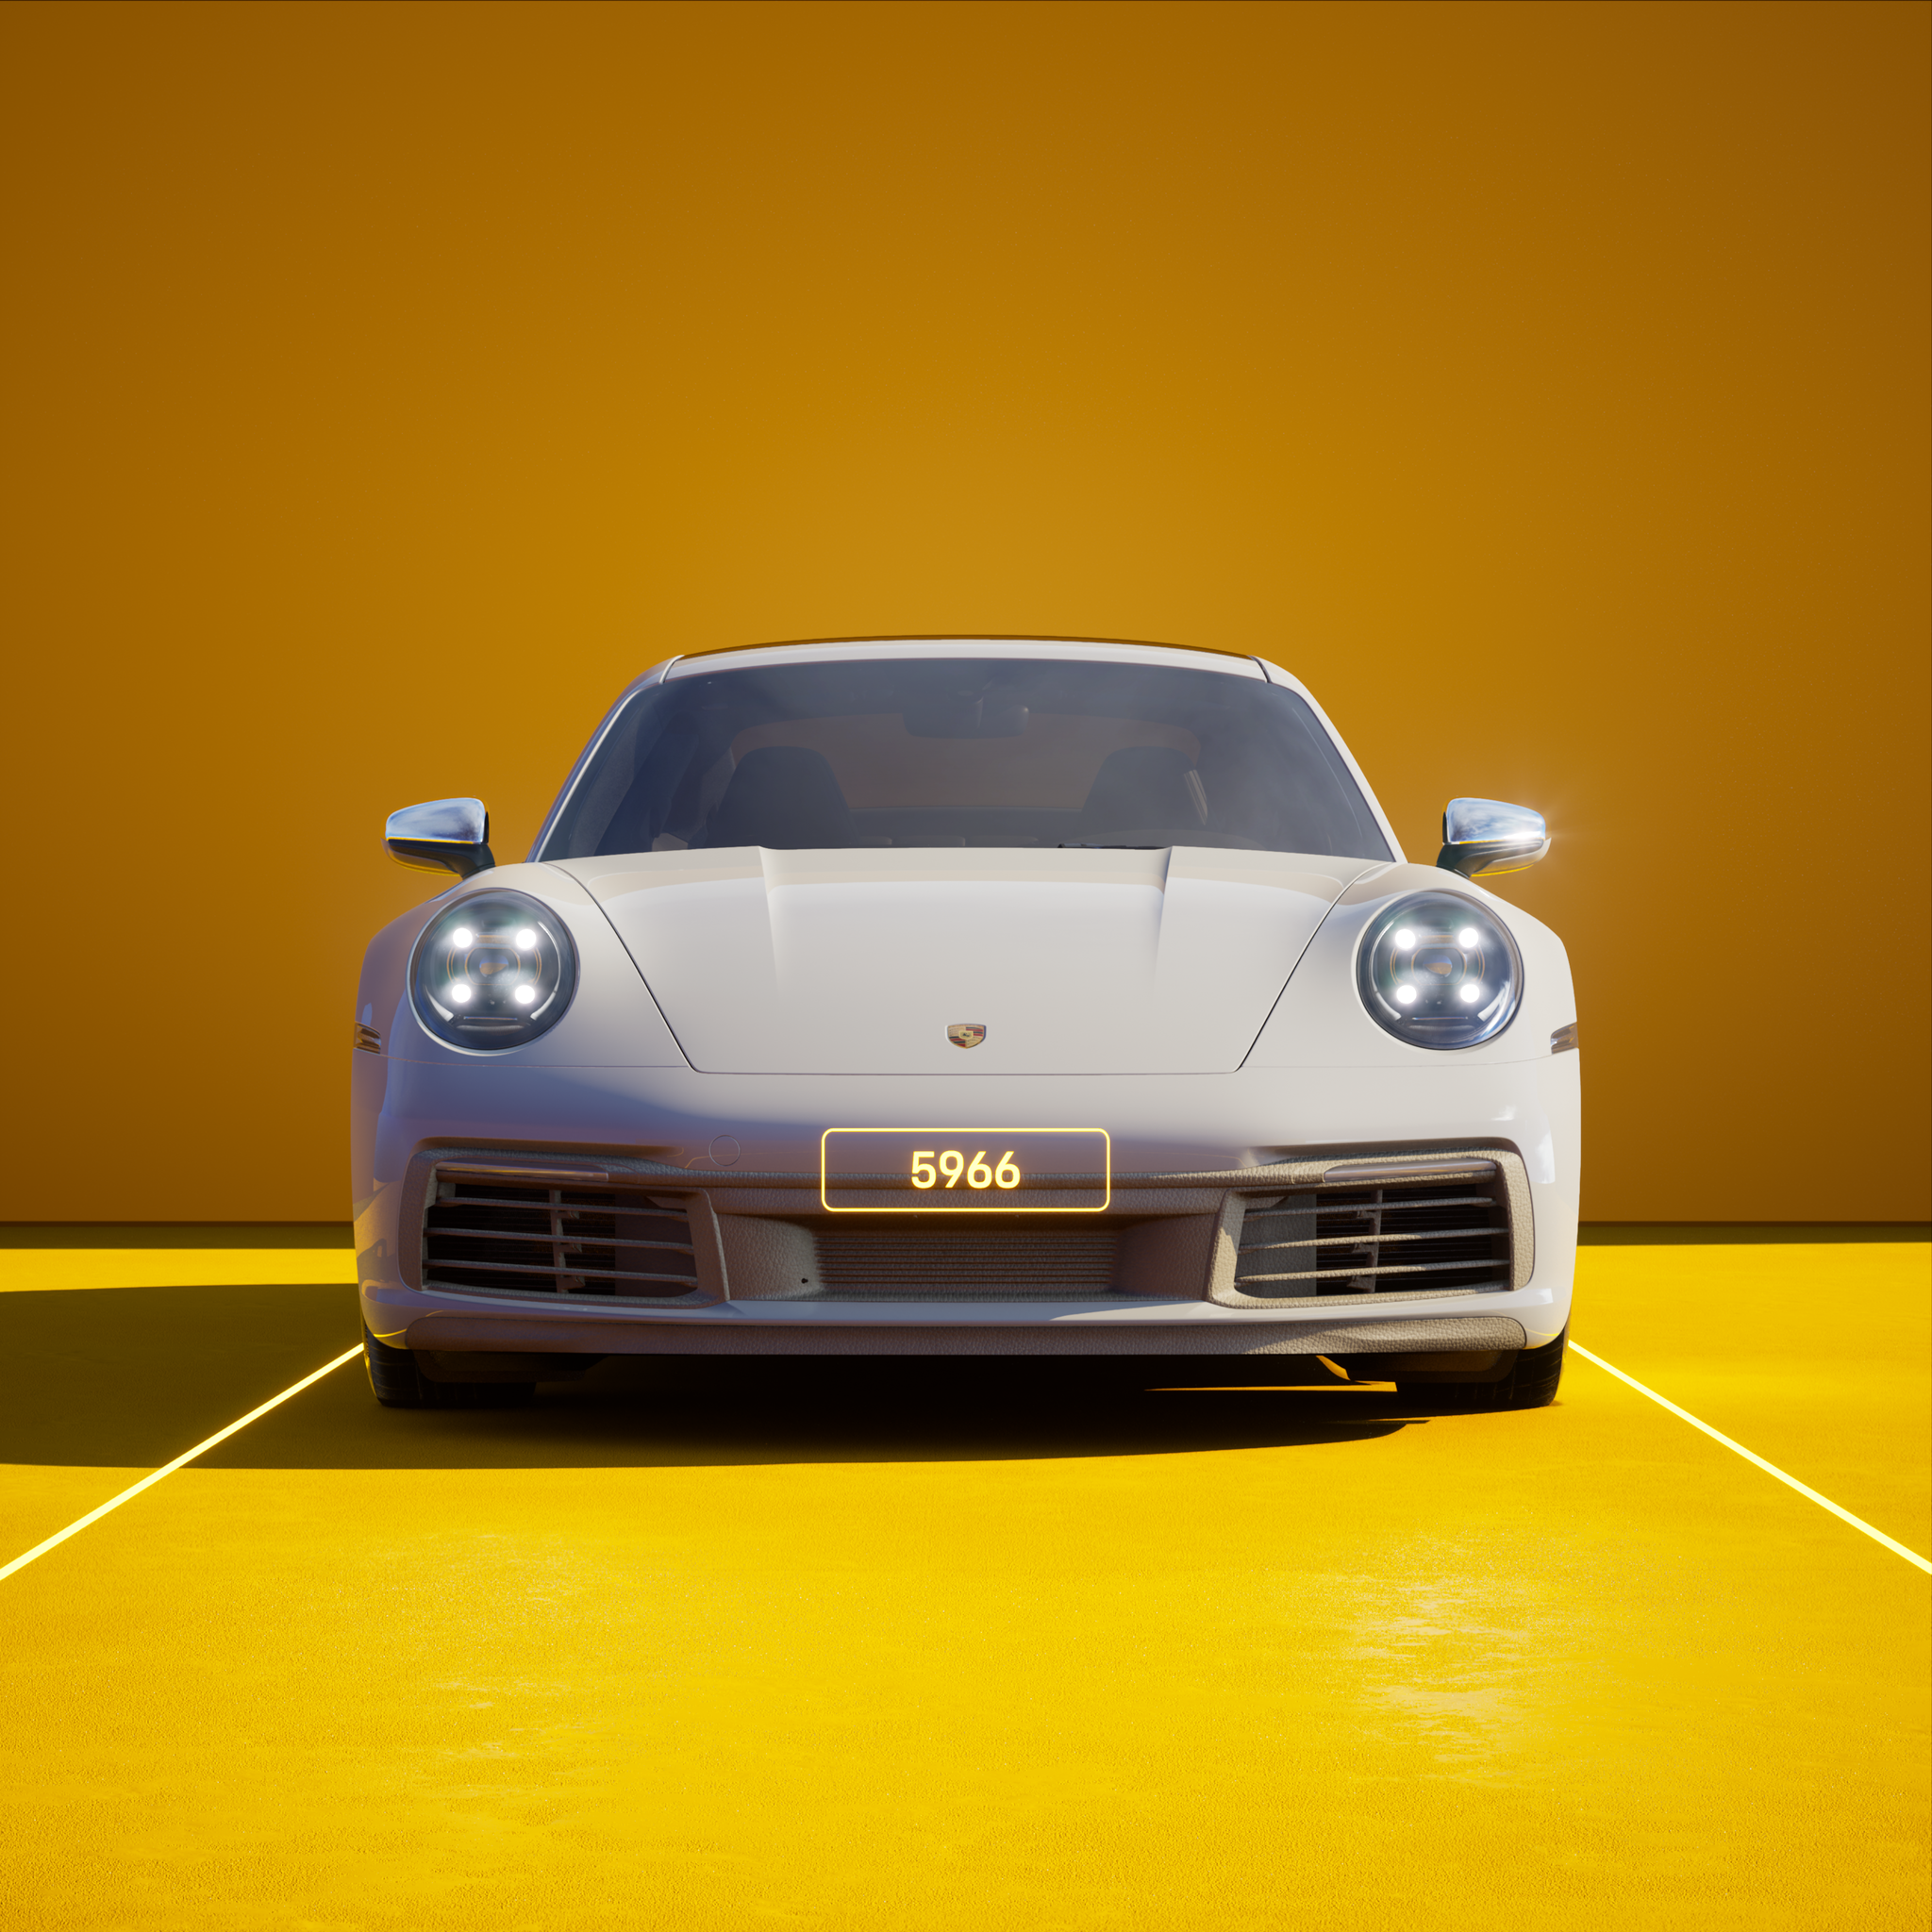 The PORSCHΞ 911 5966 image in phase